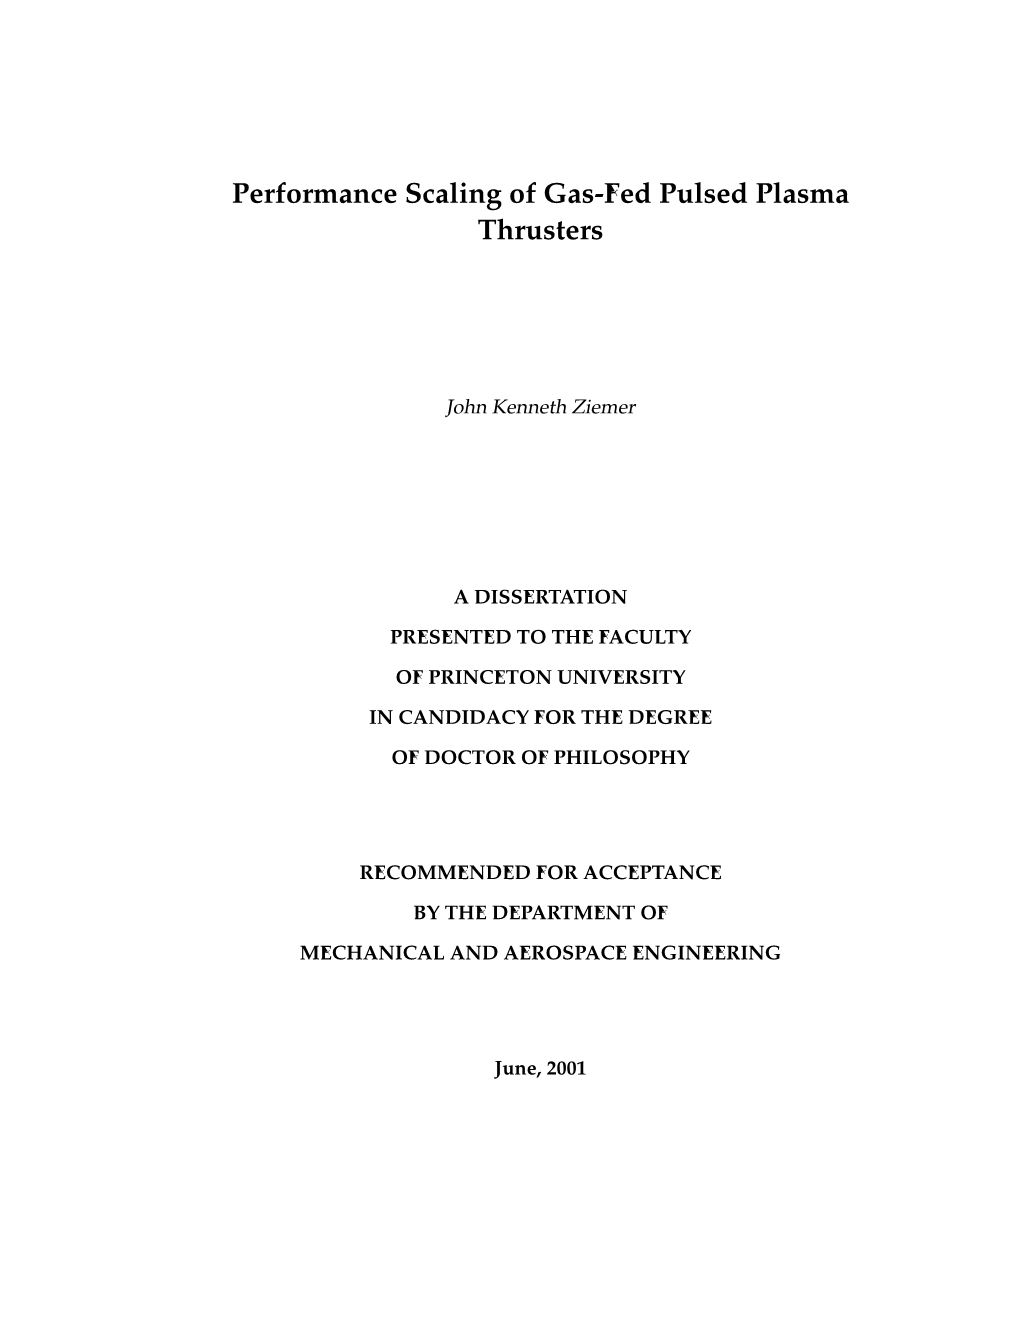 Performance Scaling of Gas-Fed Pulsed Plasma Thrusters